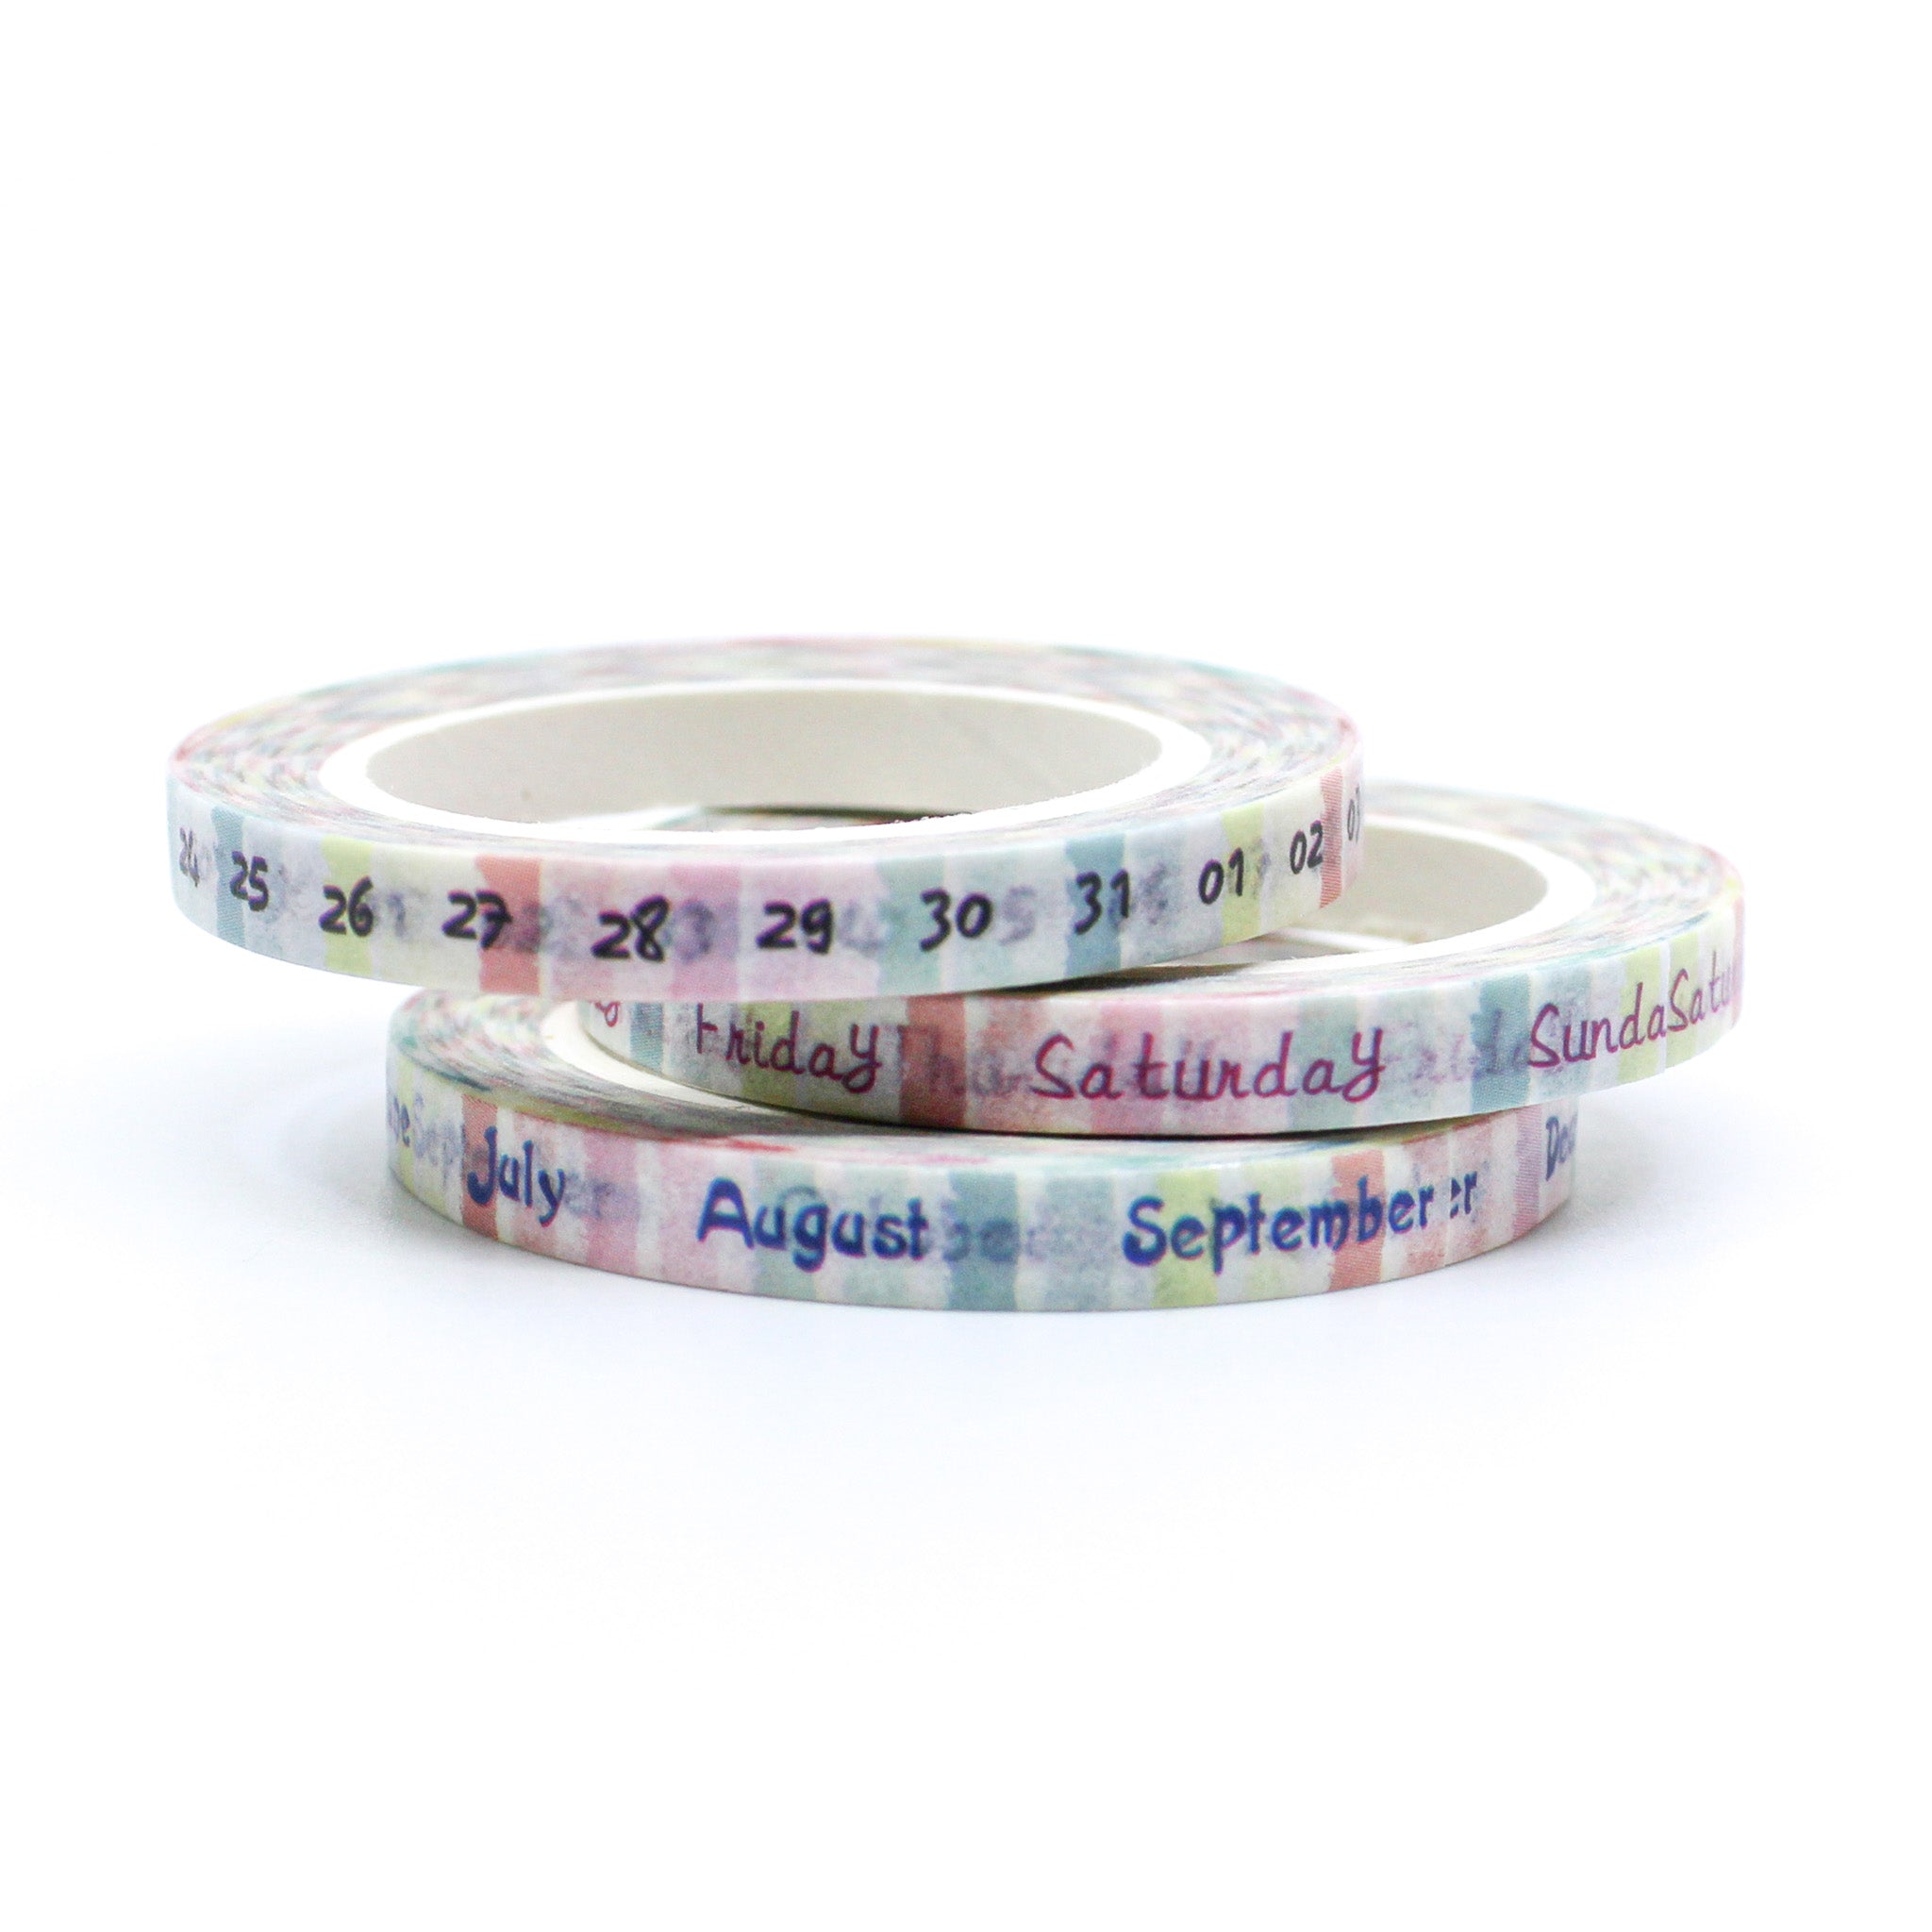 Stay organized with our thin calendar washi tape, featuring the months, days, and weekdays in a sleek and minimalist design, perfect for adding functional and stylish elements to your calendars. These tapes are sold at BBB Supplies Craft Shop.